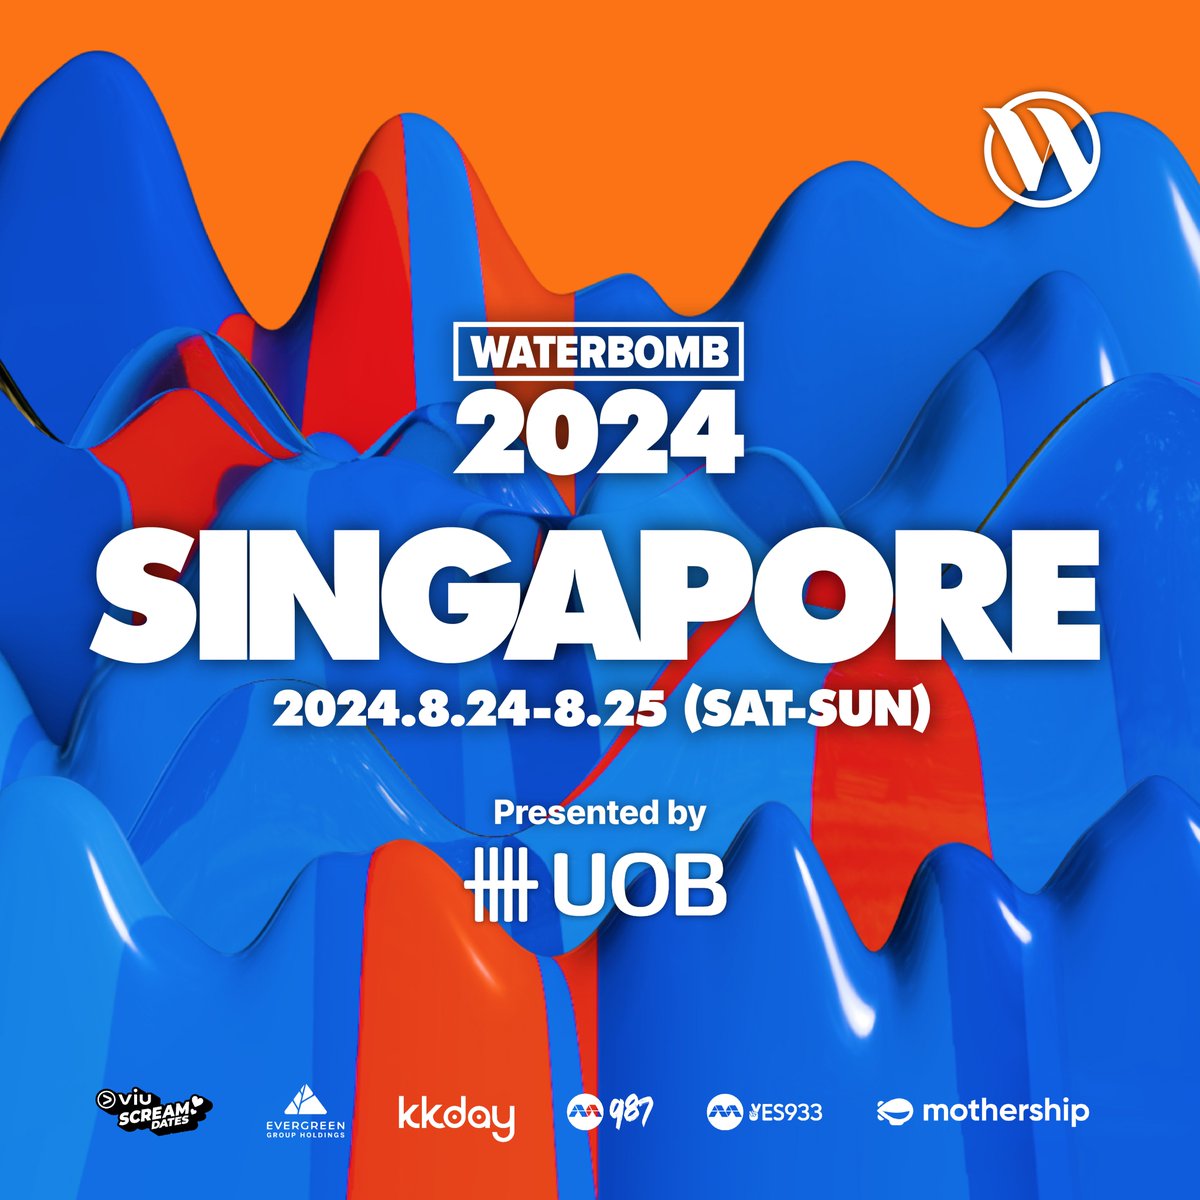 𝐊-𝐄𝐕𝐄𝐍𝐓 𝐀𝐋𝐄𝐑𝐓: #WATERBOMB_SINGAPORE It's bout to get wet in SG this August as #WATERBOMB comes to #SG for the 1st time! 📆 24 Aug (Sat) & 25 Aug (Sun) Stay tuned to @Waterbomb_SG for more info about ticketing details and line up! 𝐑𝐄𝐀𝐃: hellokpop.com/event/waterbom…